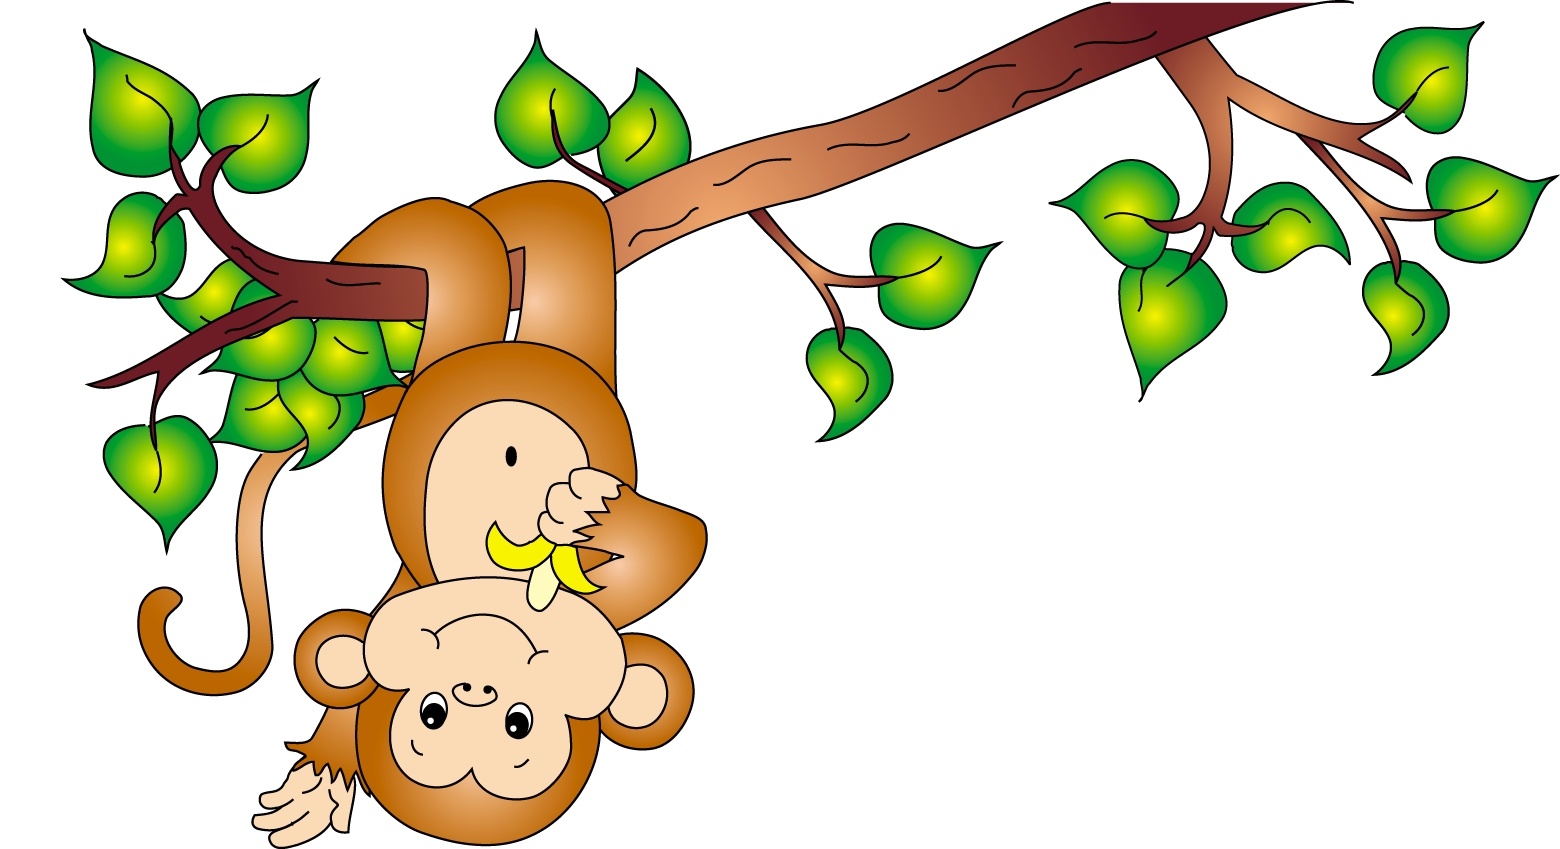 Upside Down Hanging Monkey Clipart   Clipart Panda   Free Clipart